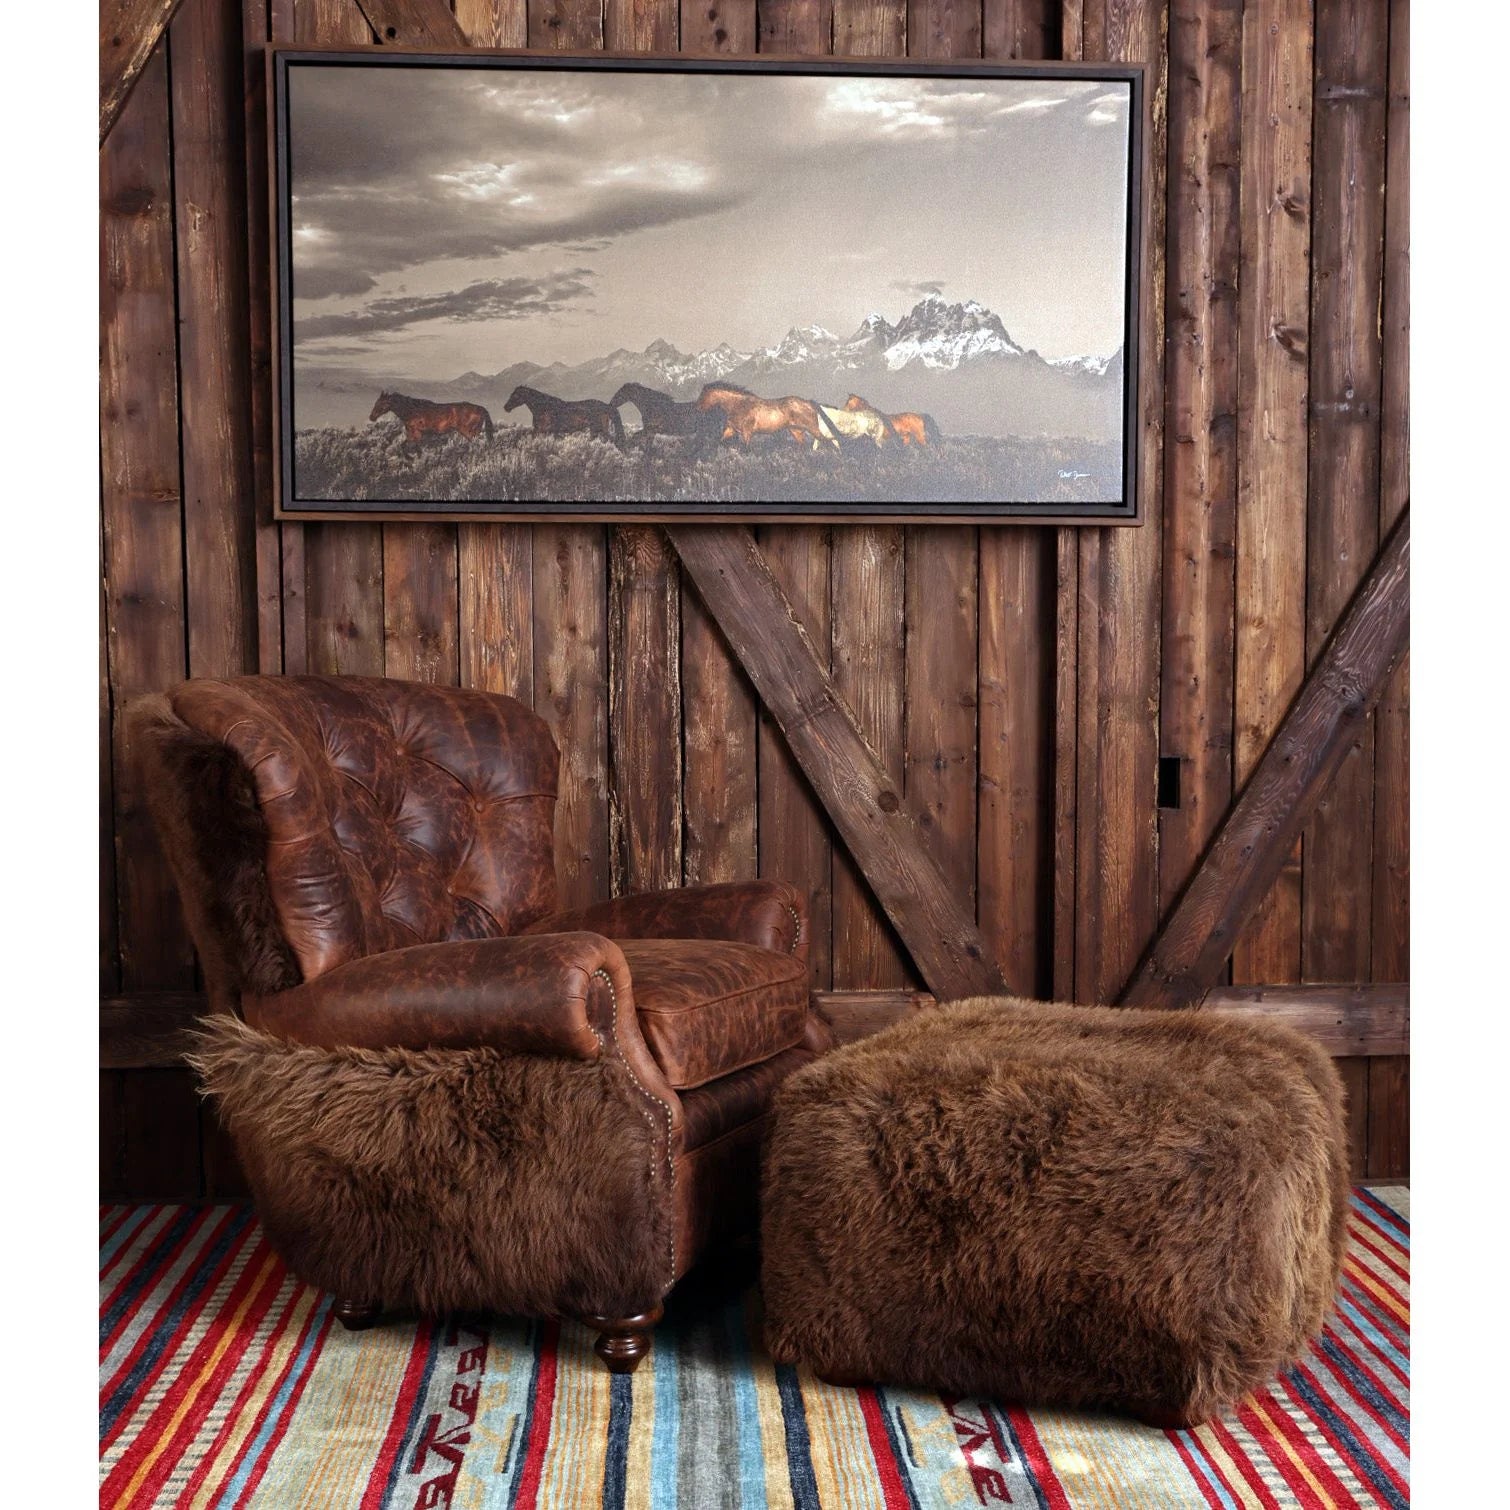 Yellowstone Tufted Chair